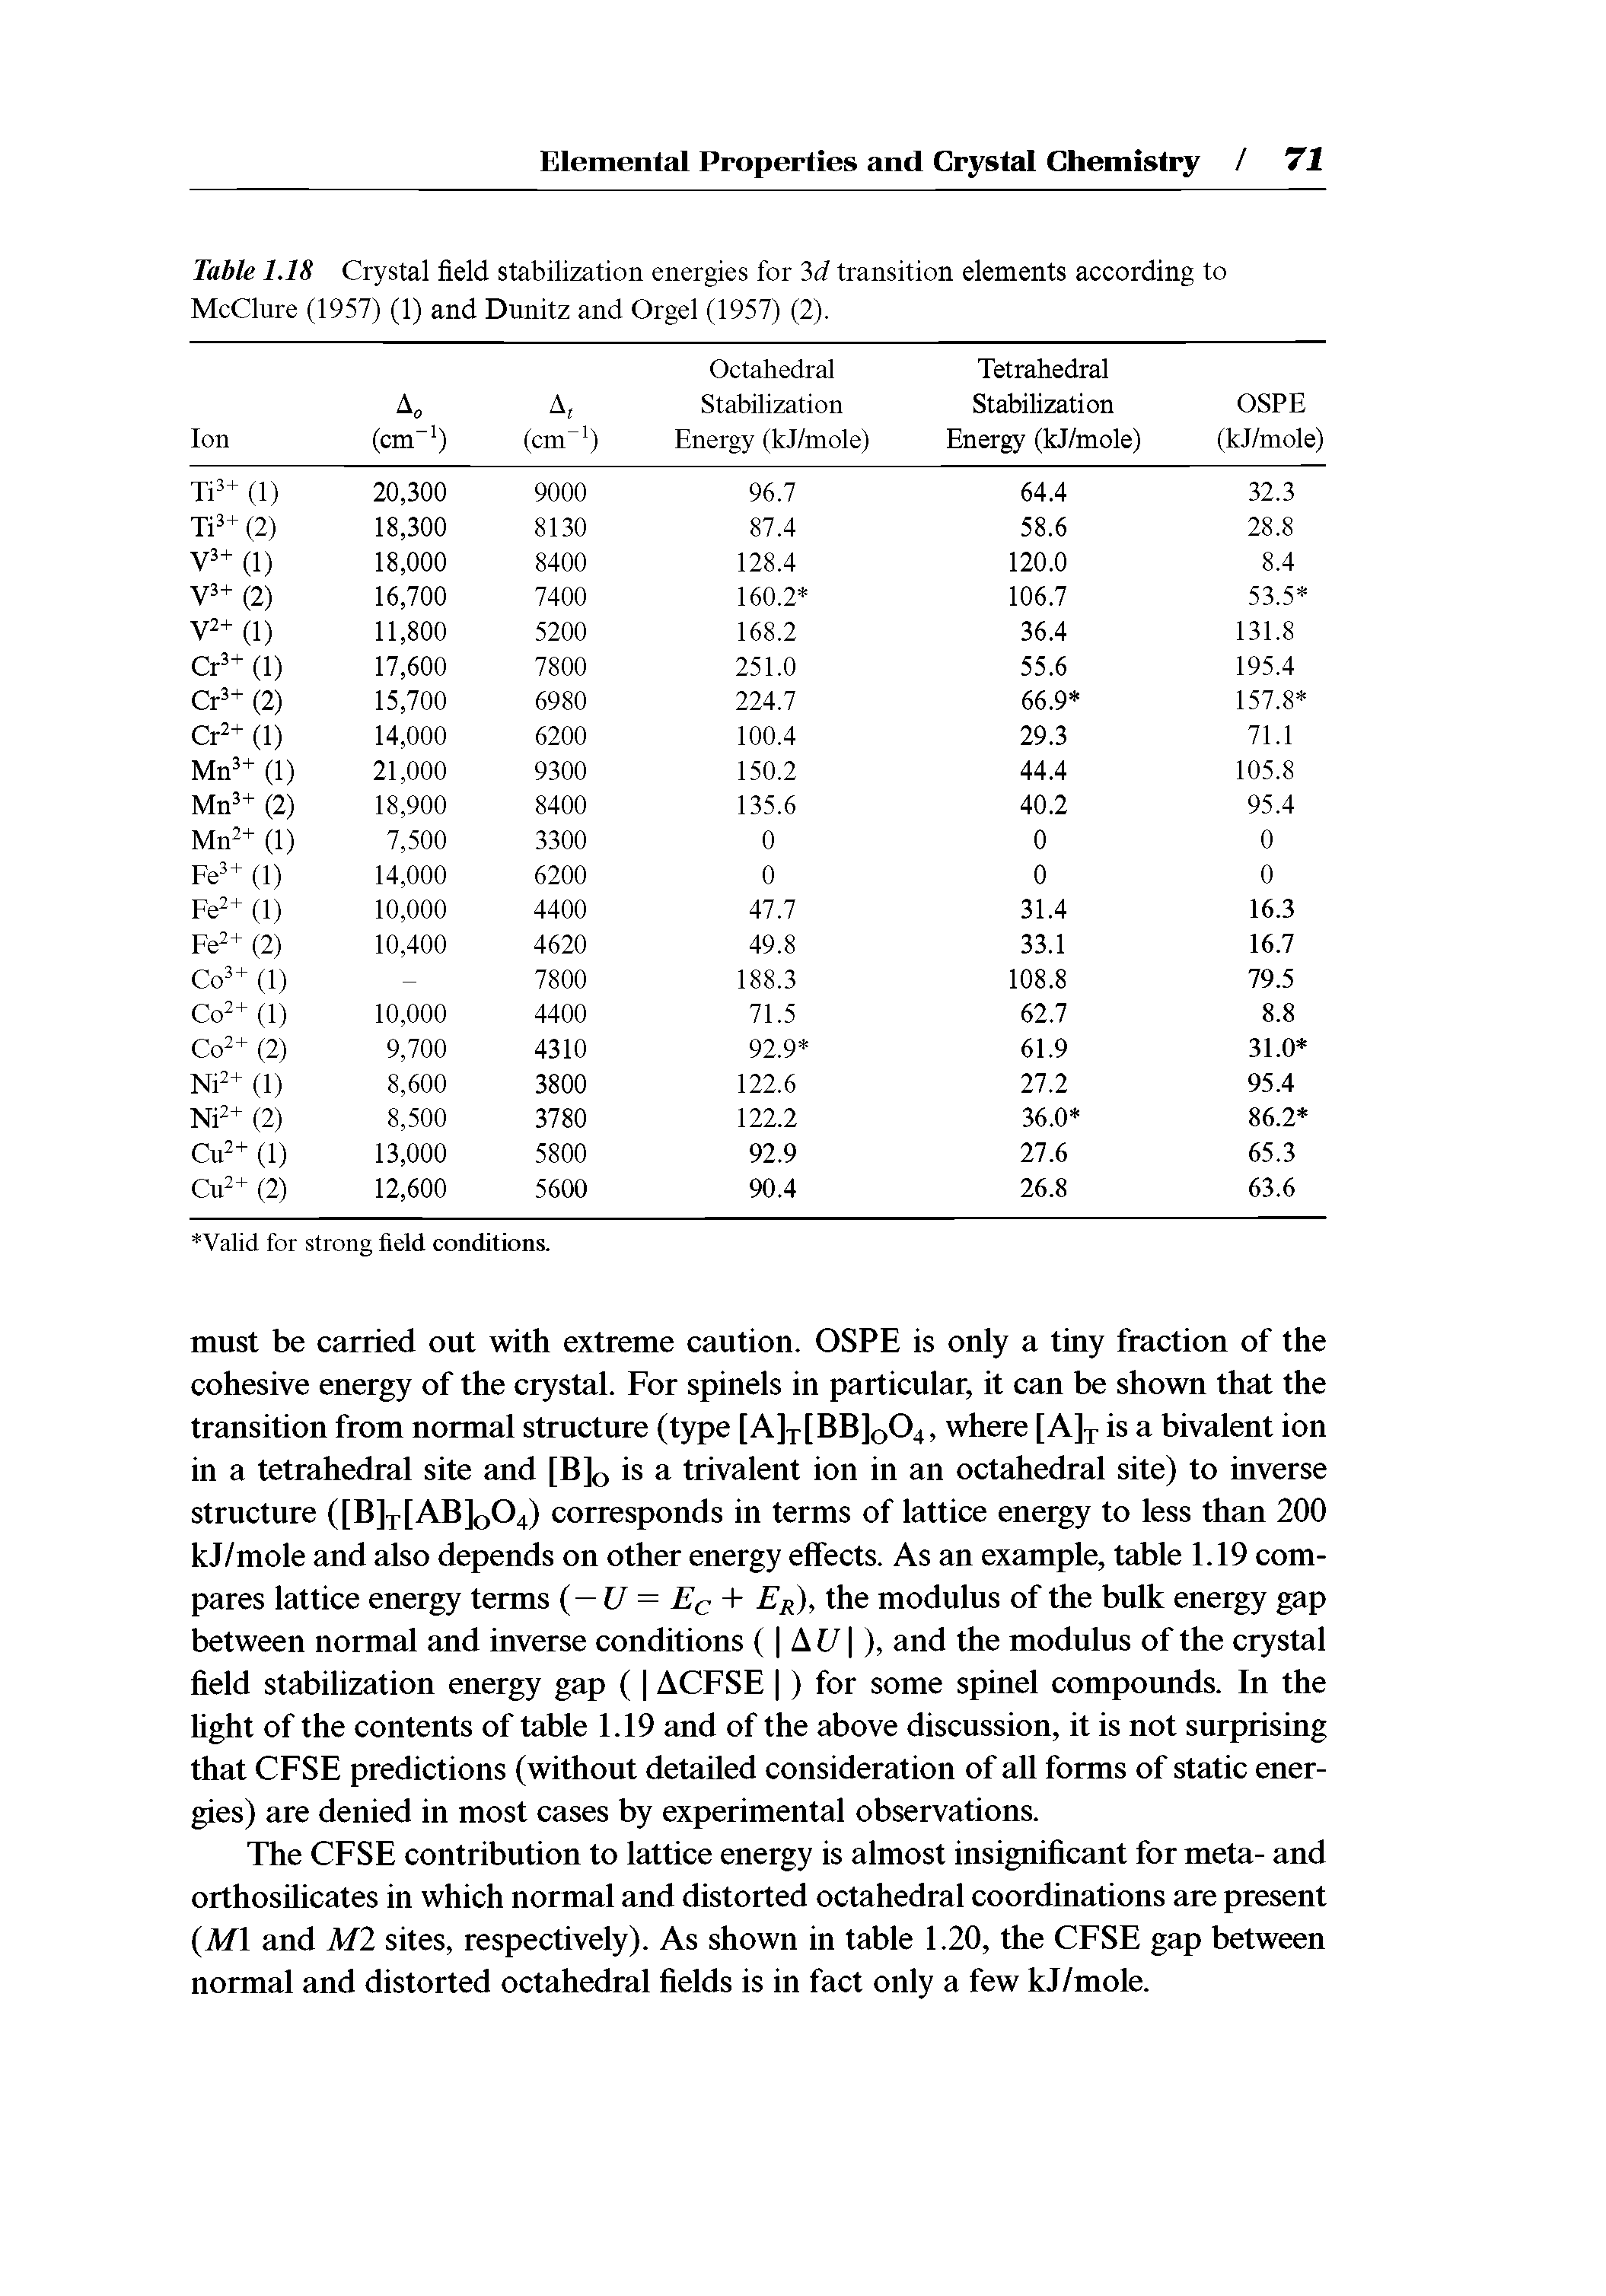 Table 1.18 Crystal field stabilization energies for 3d transition elements according to McClure (1957) (1) and Dunitz and Orgel (1957) (2). ...